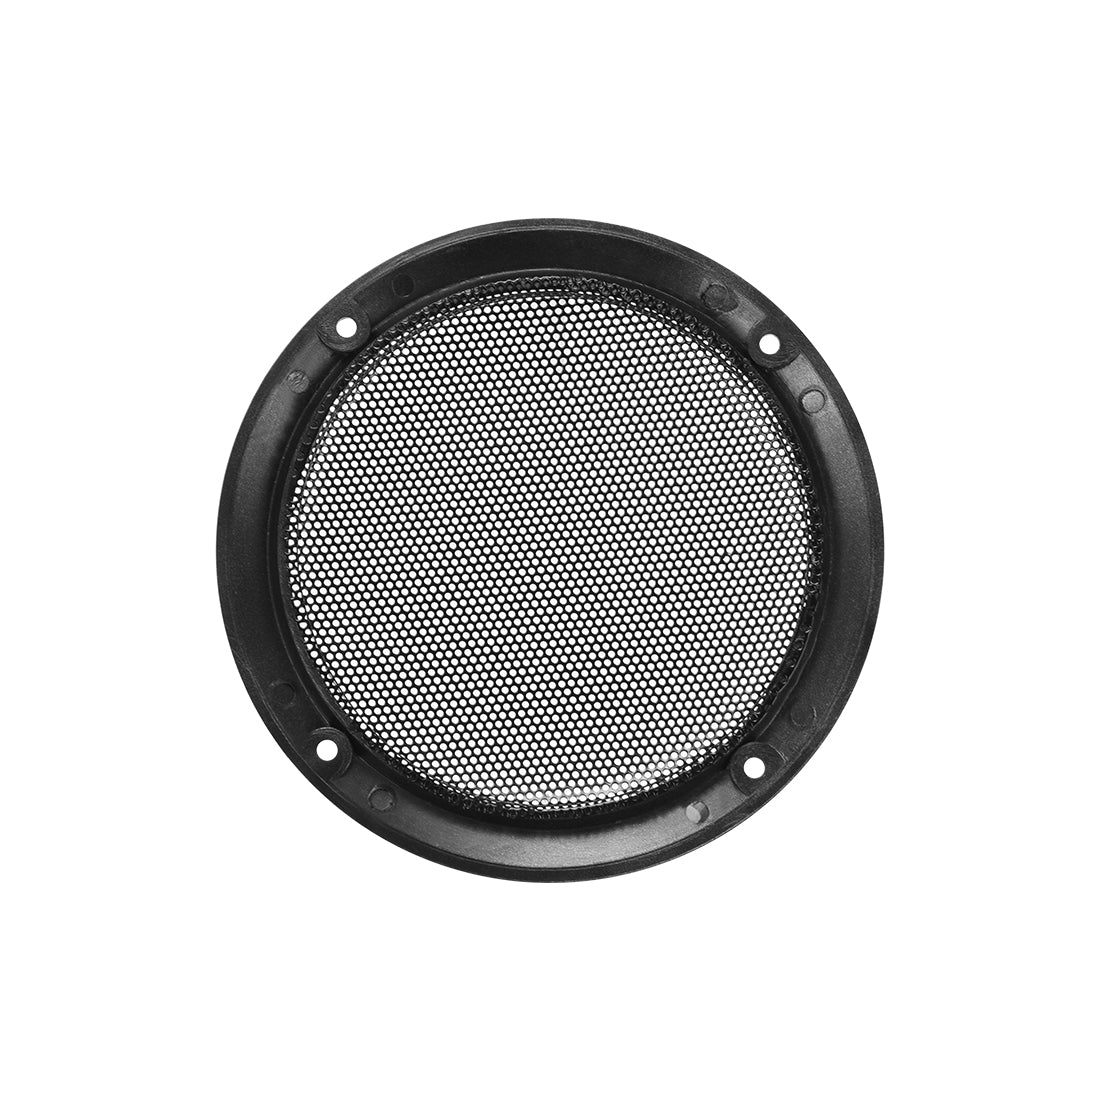 uxcell Uxcell 2pcs 4" Speaker Grill Mesh Decorative Circle Woofer Guard Protector Cover Audio Accessories Silver